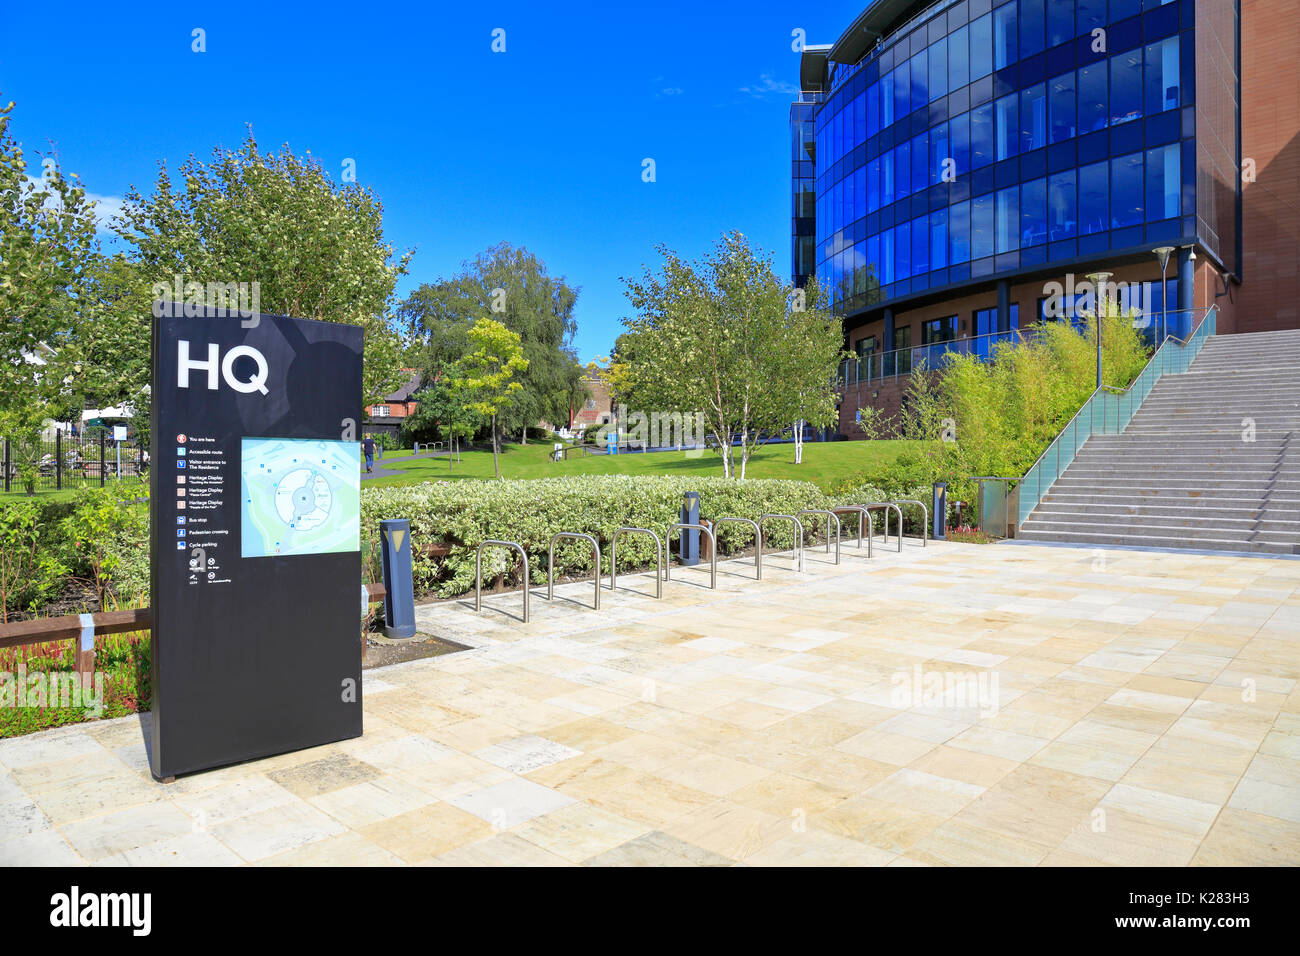 HQ Chester, Cheshire West & Chester Rat Büros, Chester, Cheshire, England, UK. Stockfoto